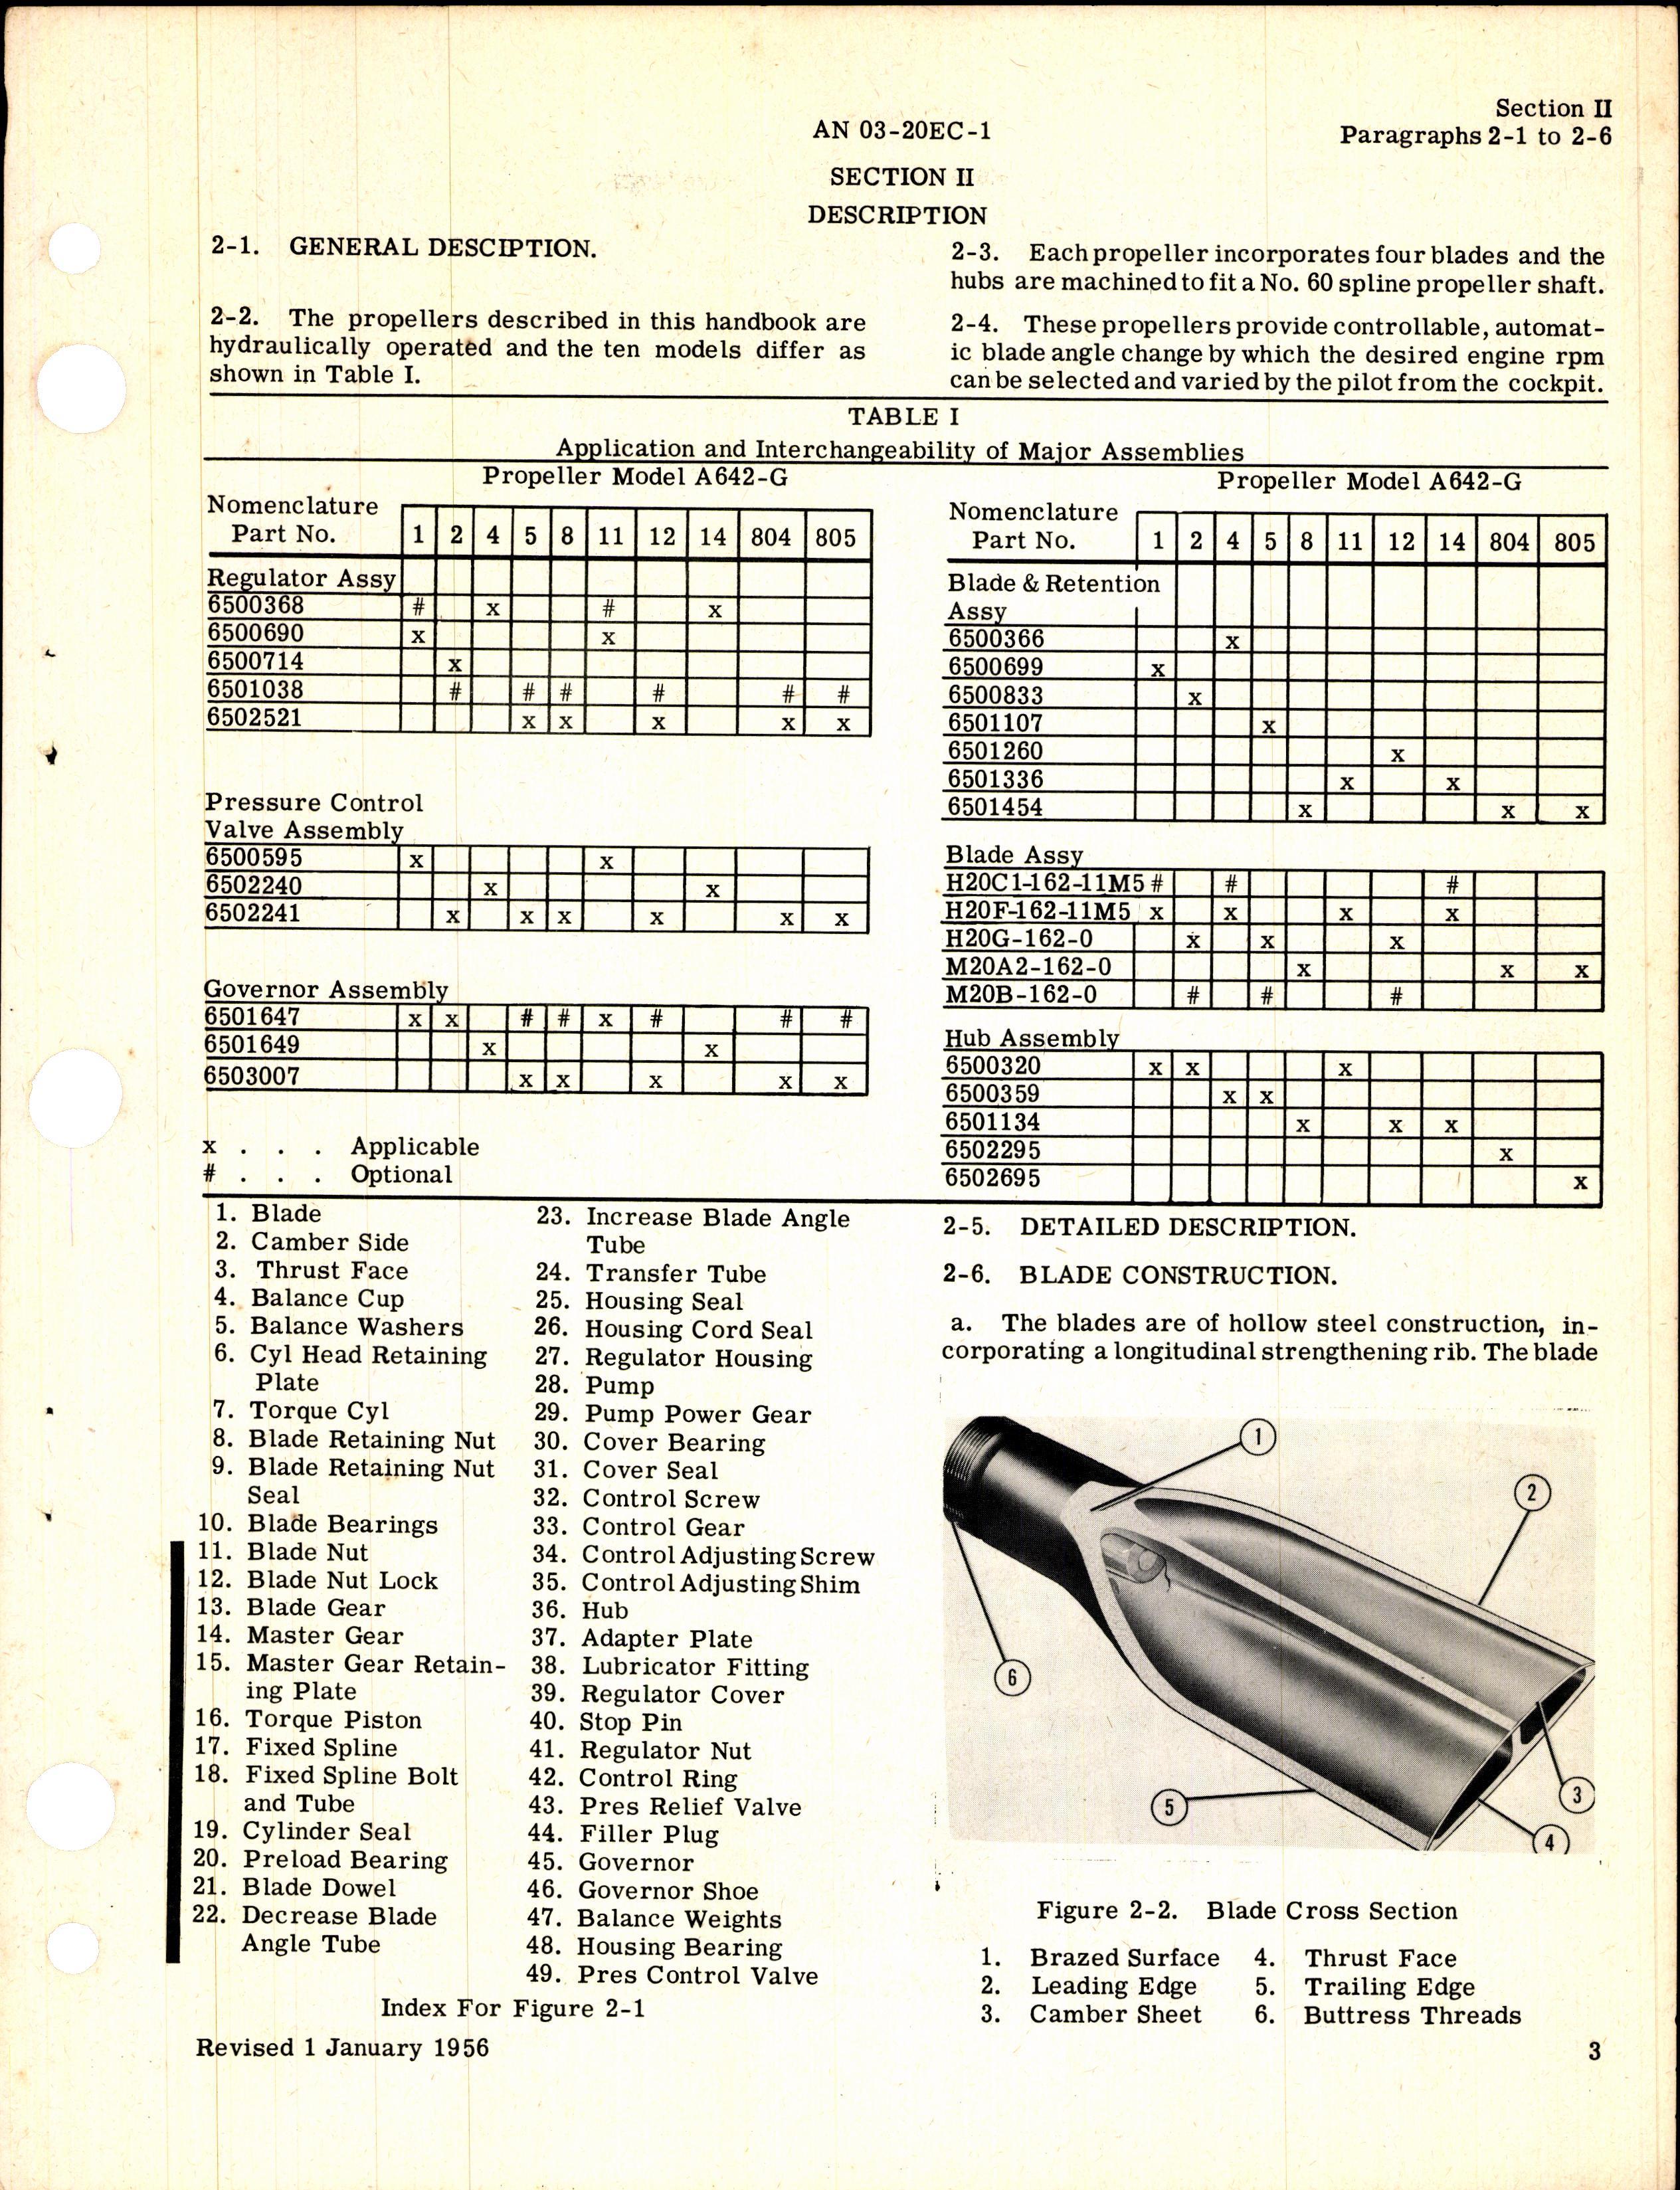 Sample page 7 from AirCorps Library document: Operation, Service, & Overhaul Instructions with Parts Breakdown for Propeller Models A642